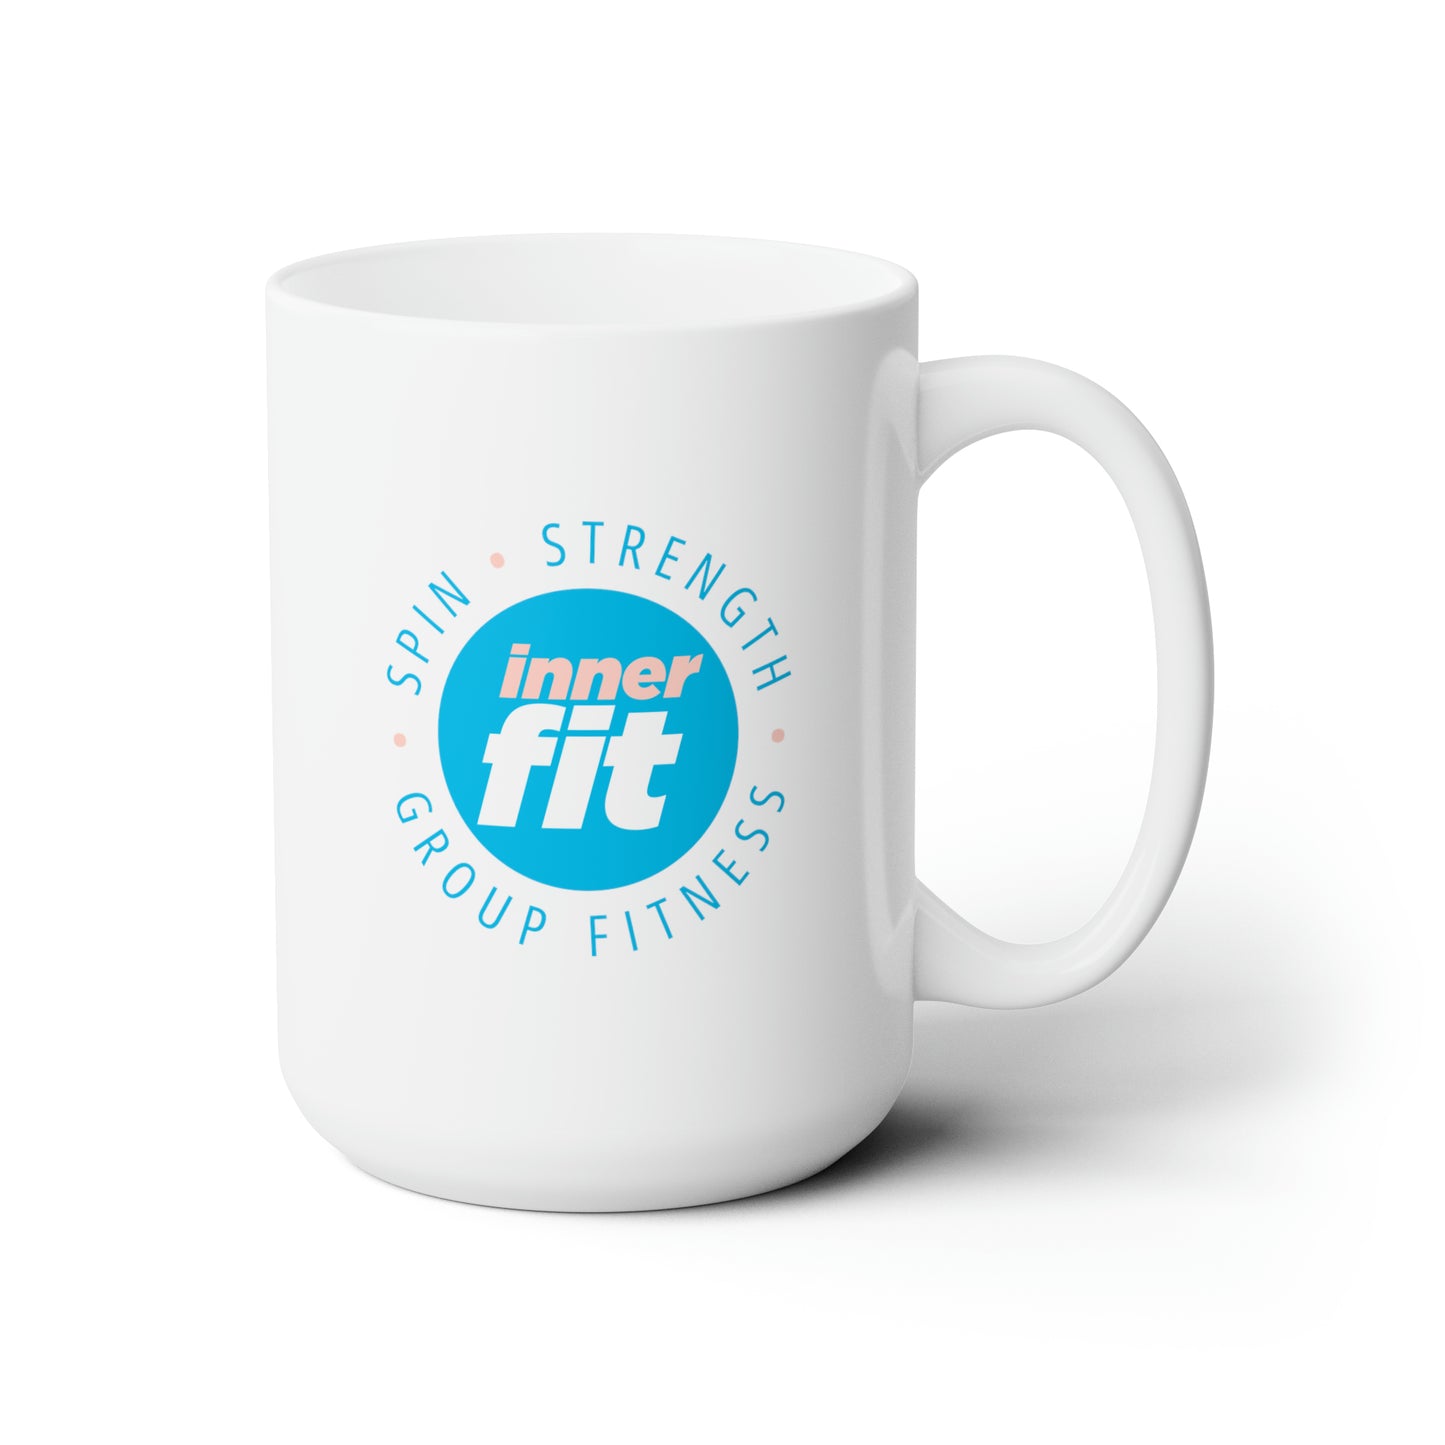 15 oz 'Deadlifts and Donuts' Fitness Mug from Inner Fit